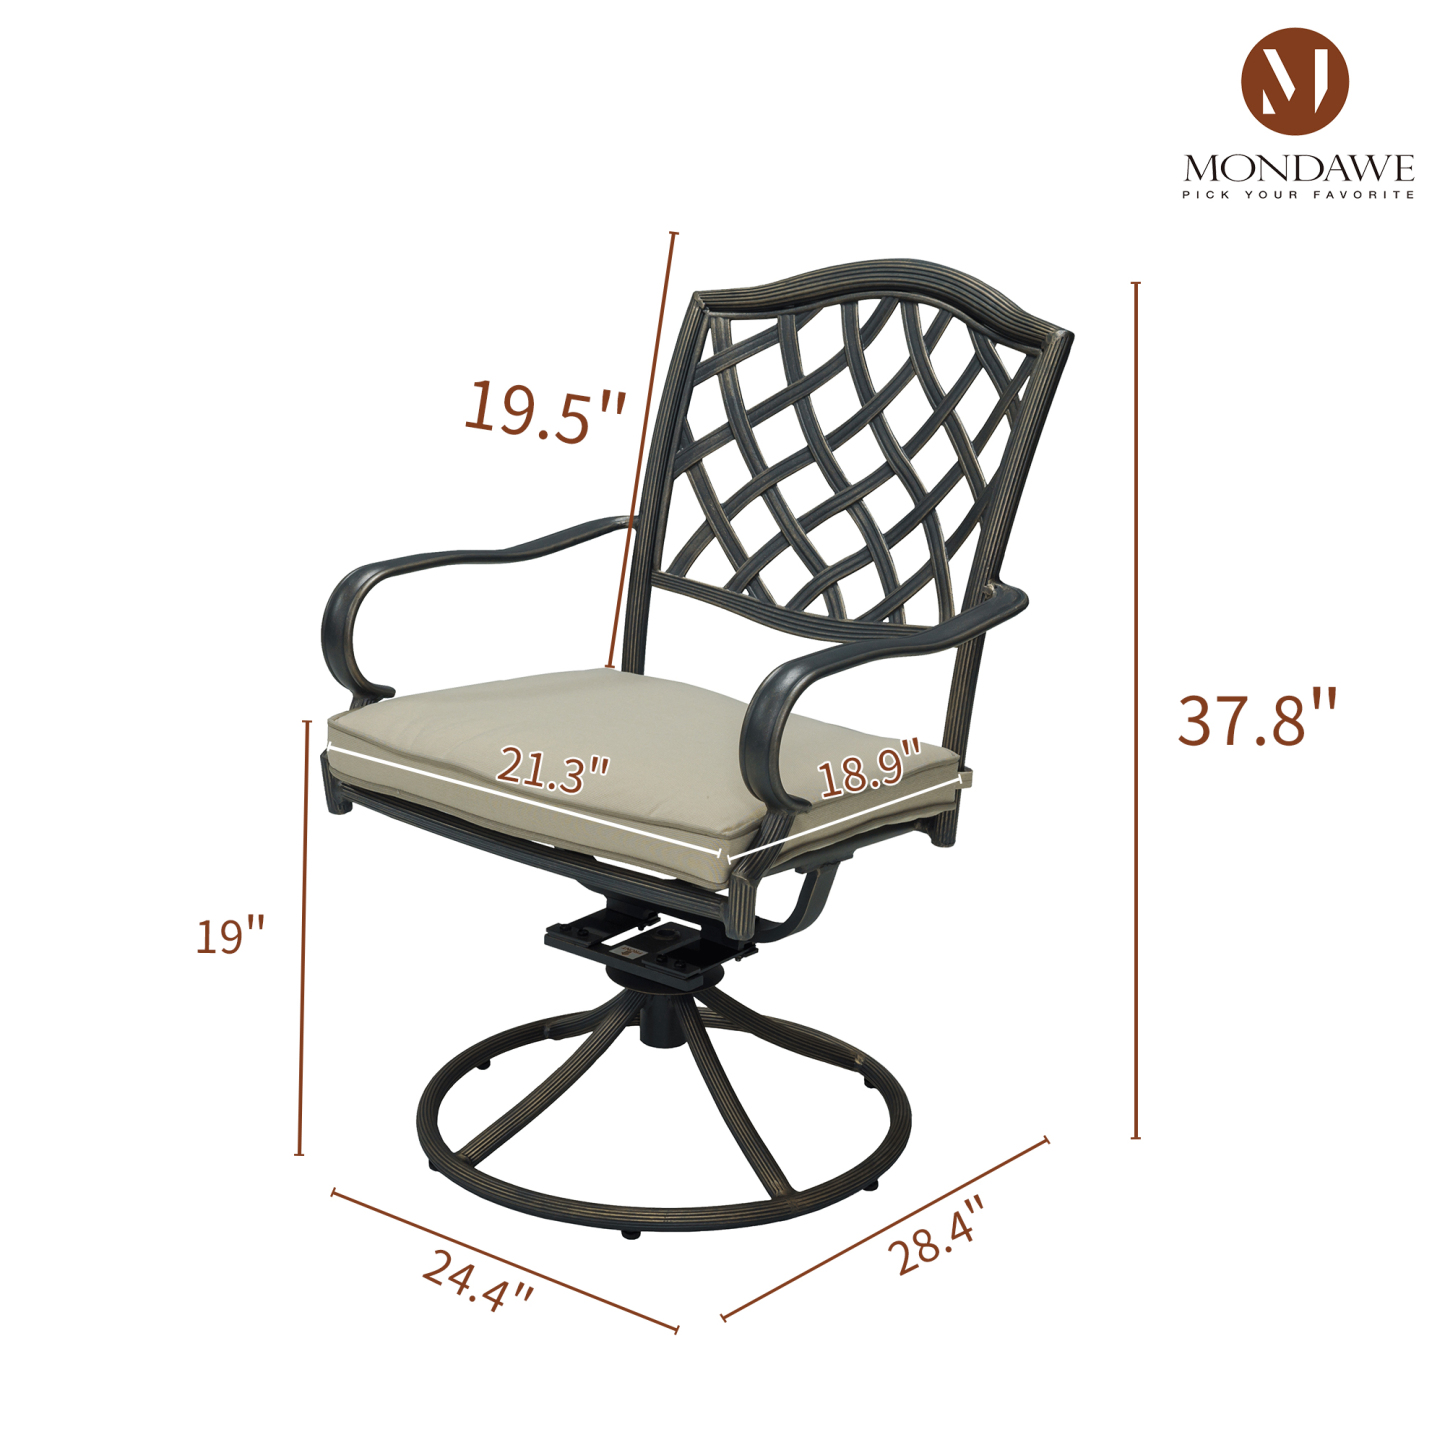 Mondawe 2 Pieces Swivel Aluminum Patio Dining Chairs with Cushion for Garden Backyard Bistro Furniture